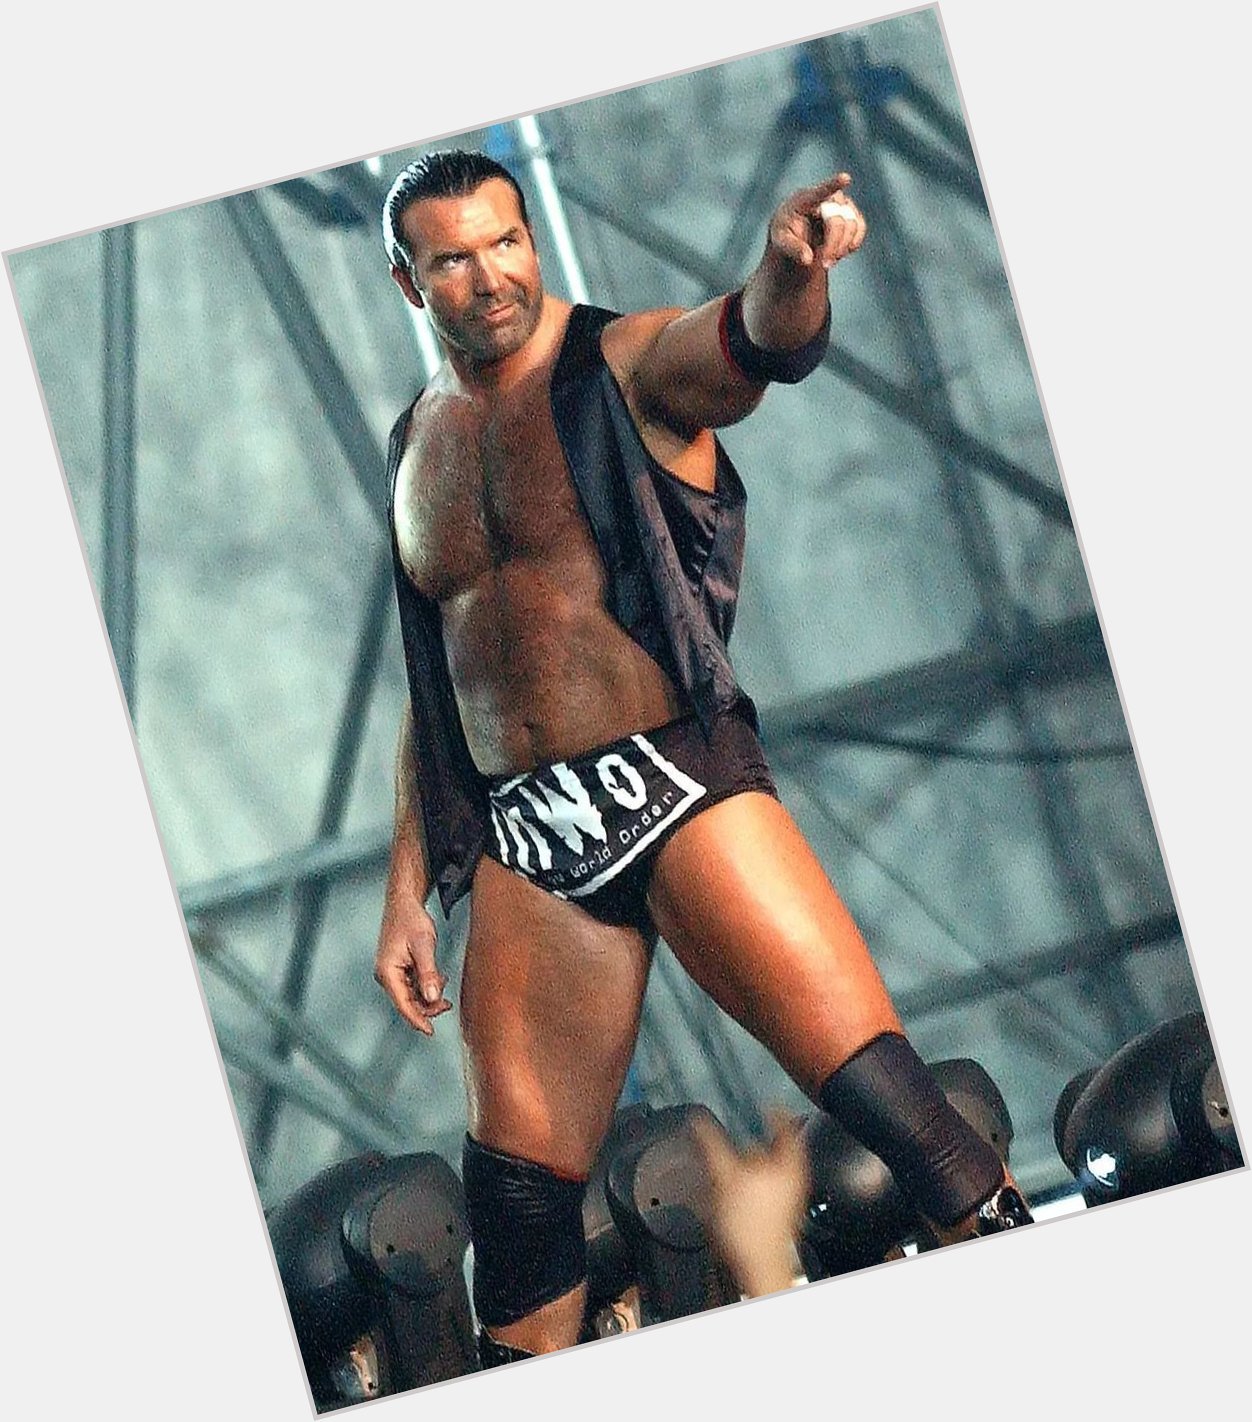 Happy Heavenly Birthday to Scott Hall who would\ve turned 64 today 